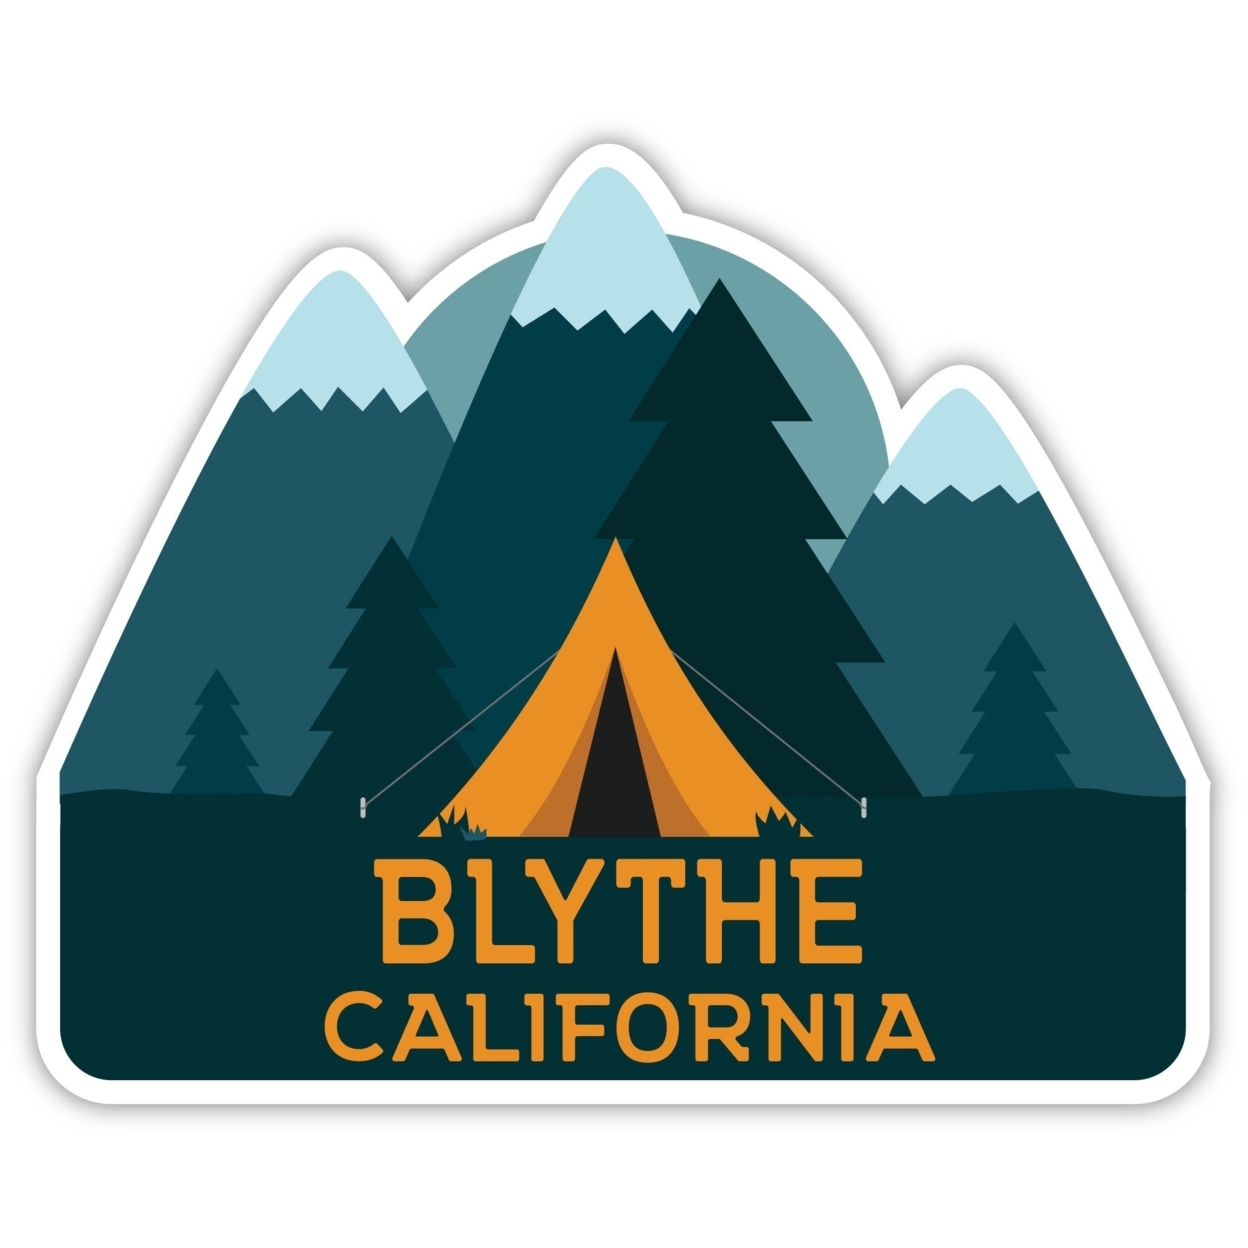 Blythe California Souvenir Decorative Stickers (Choose Theme And Size) - 4-Pack, 10-Inch, Tent